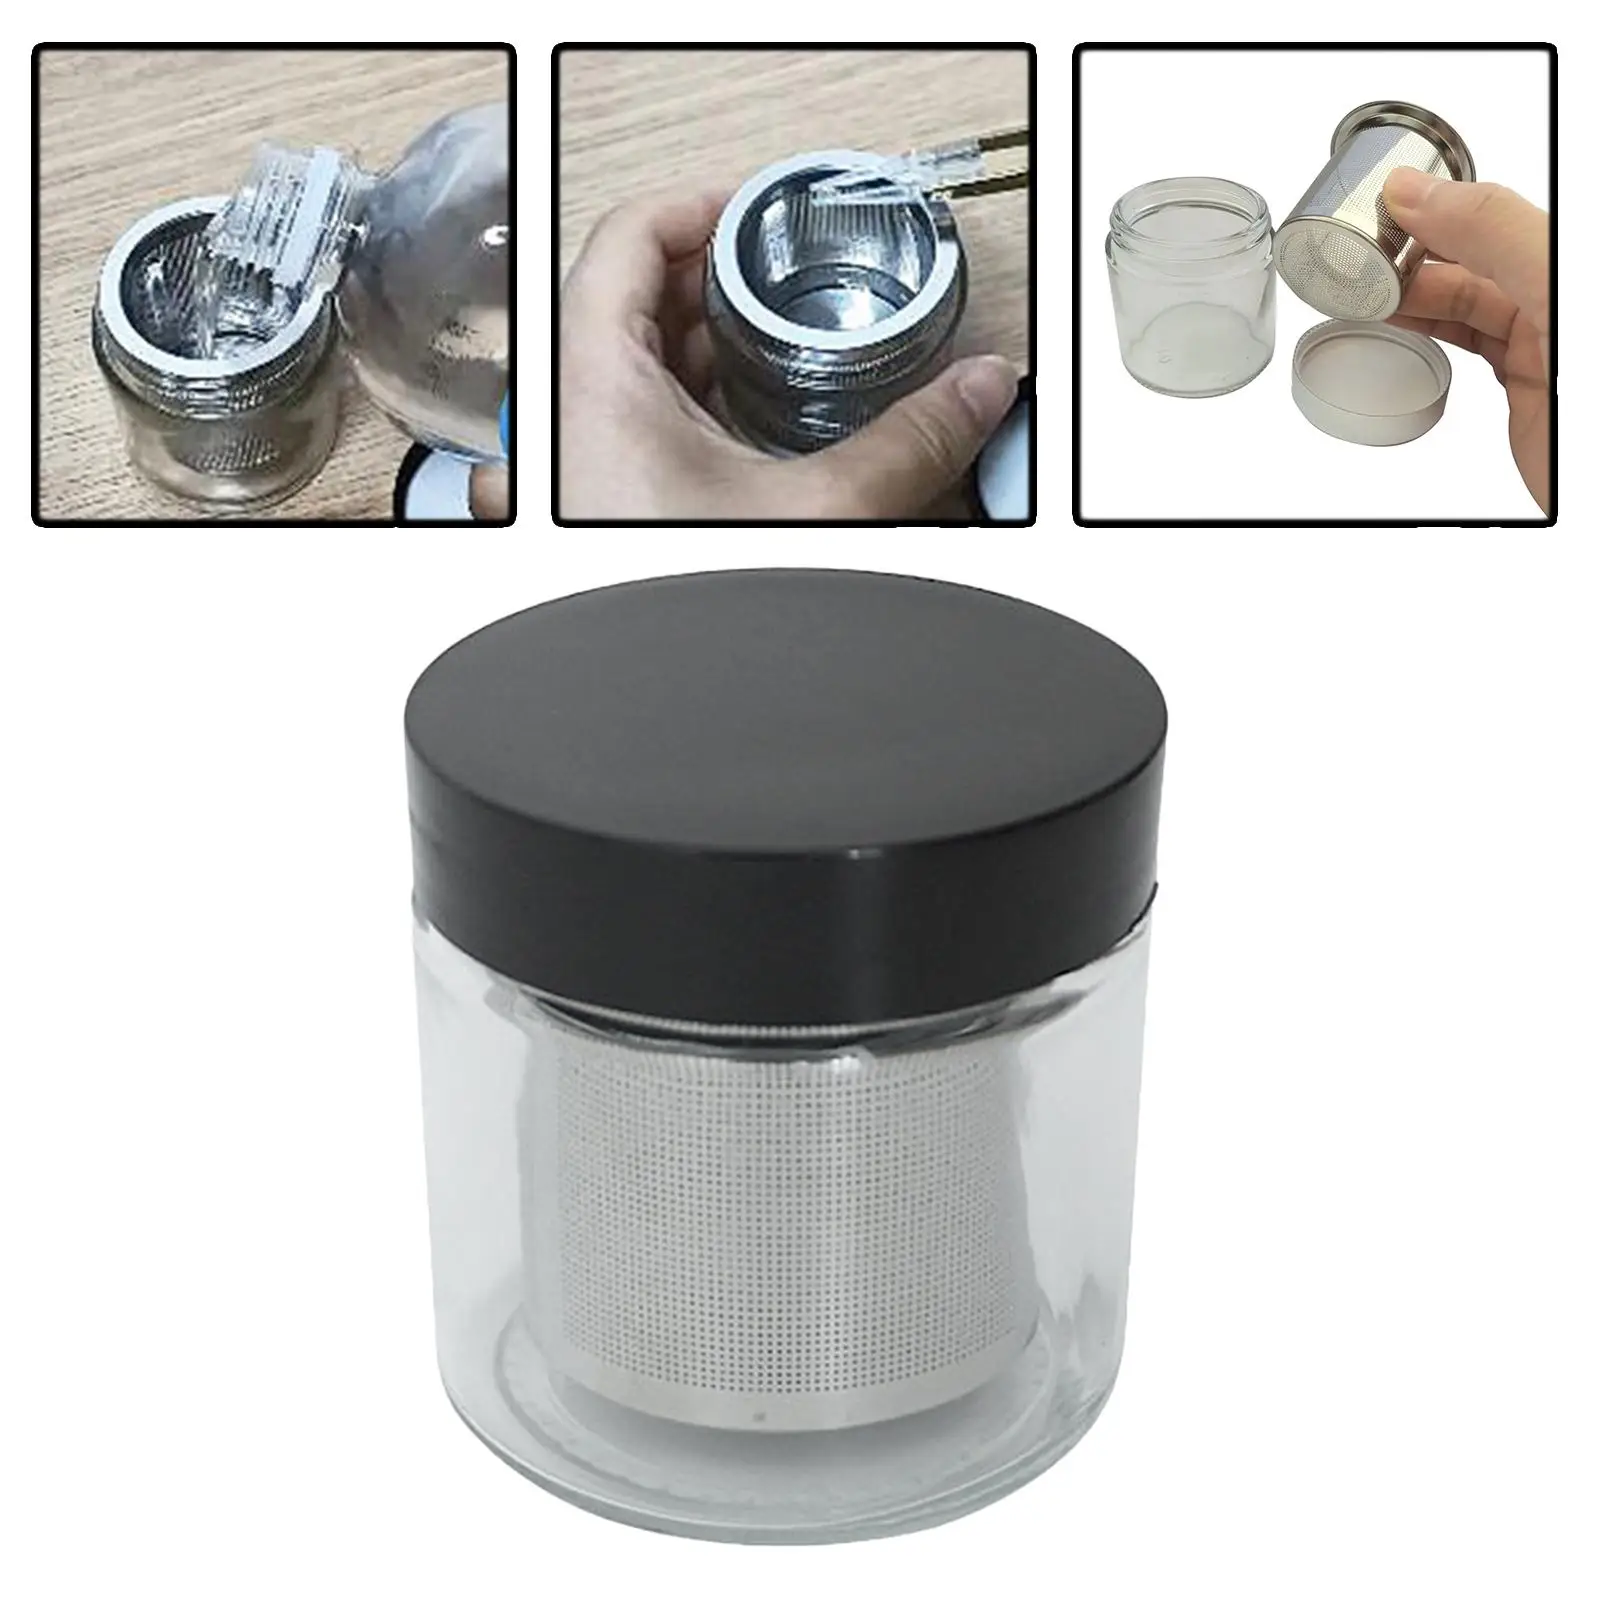 Diamond Washing Cup Cleaning Jar Washer Watchmaker Watch Parts Cleaner